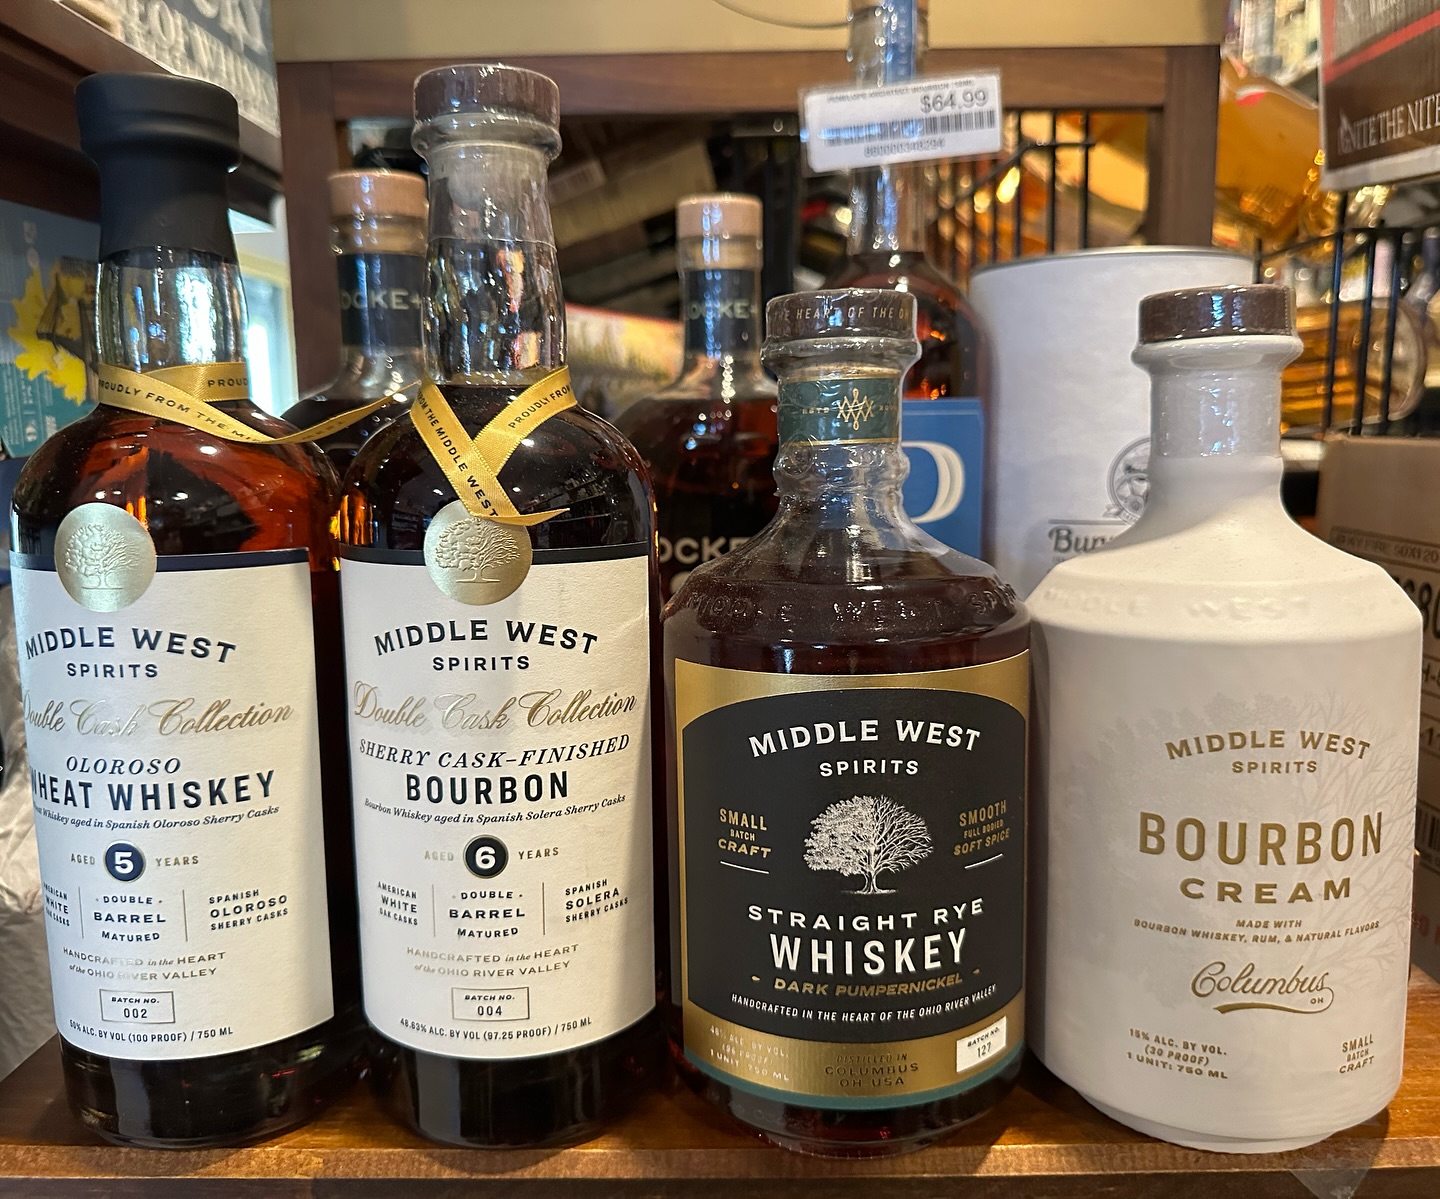 Whiskies from the MidWest